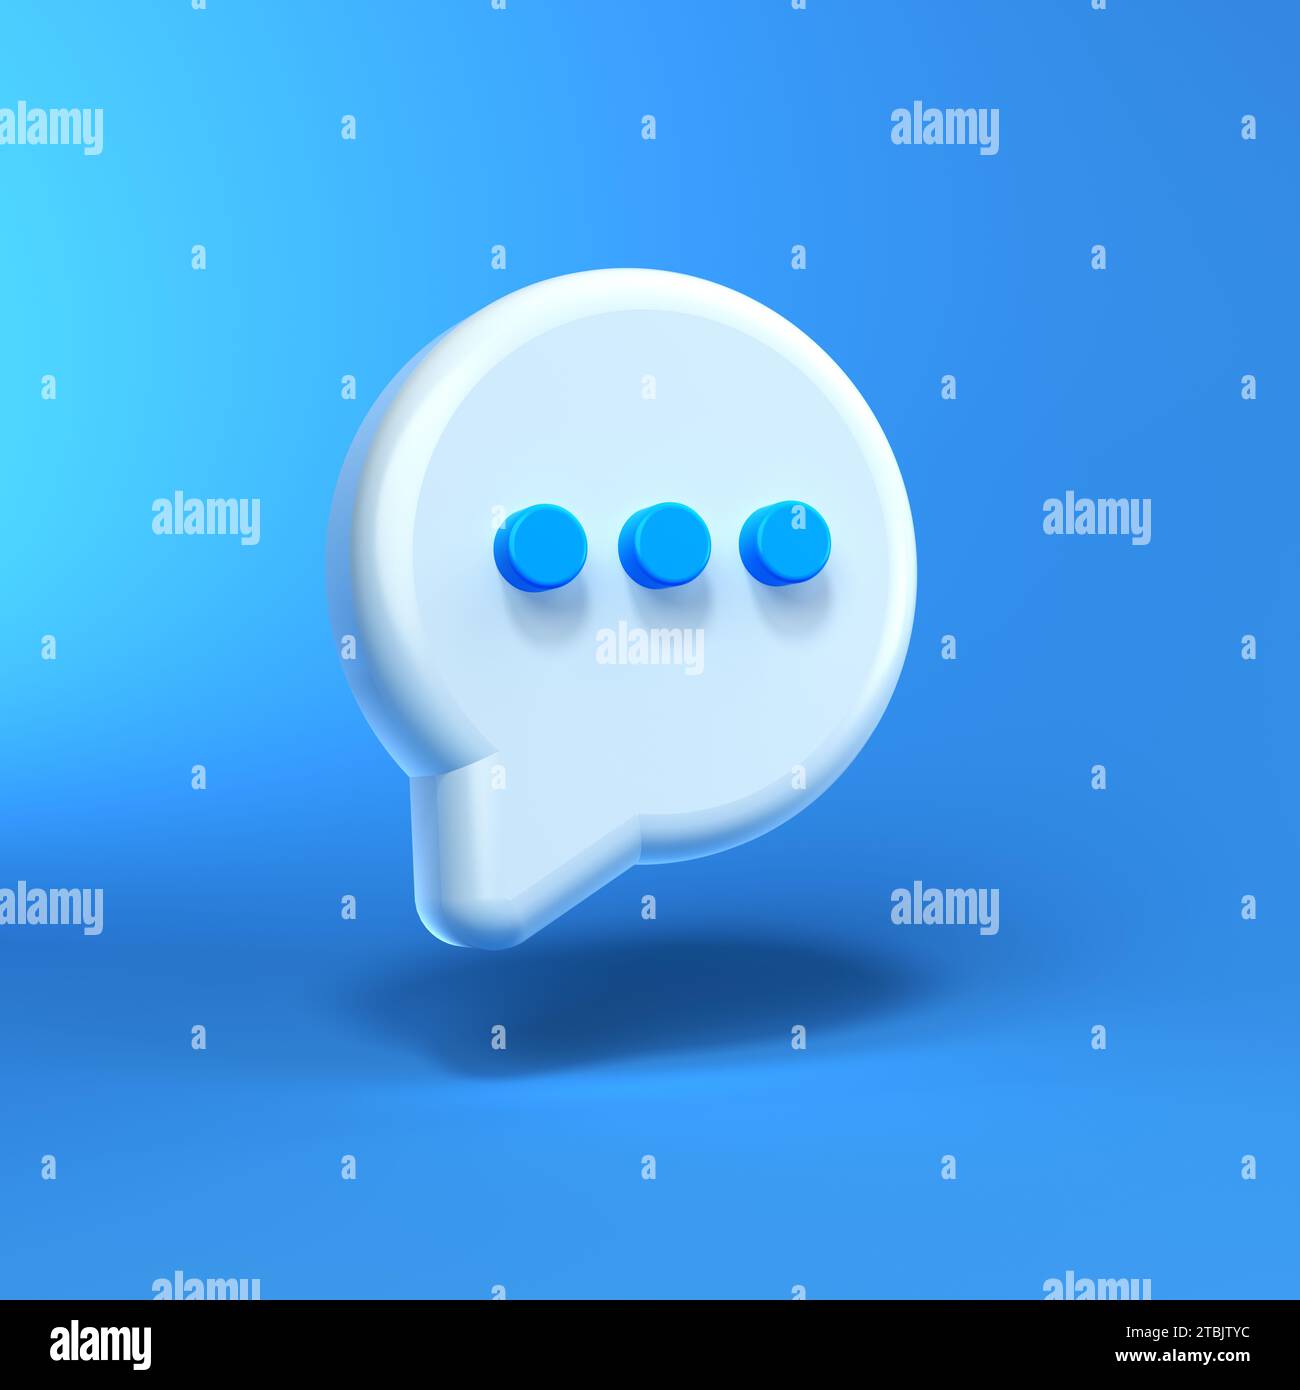 Chat Bubble Icon Isolated Over Blue Background. Cartoon Minimalism Style. Inthernet Concept. 3D Render Illustration. Stock Photo